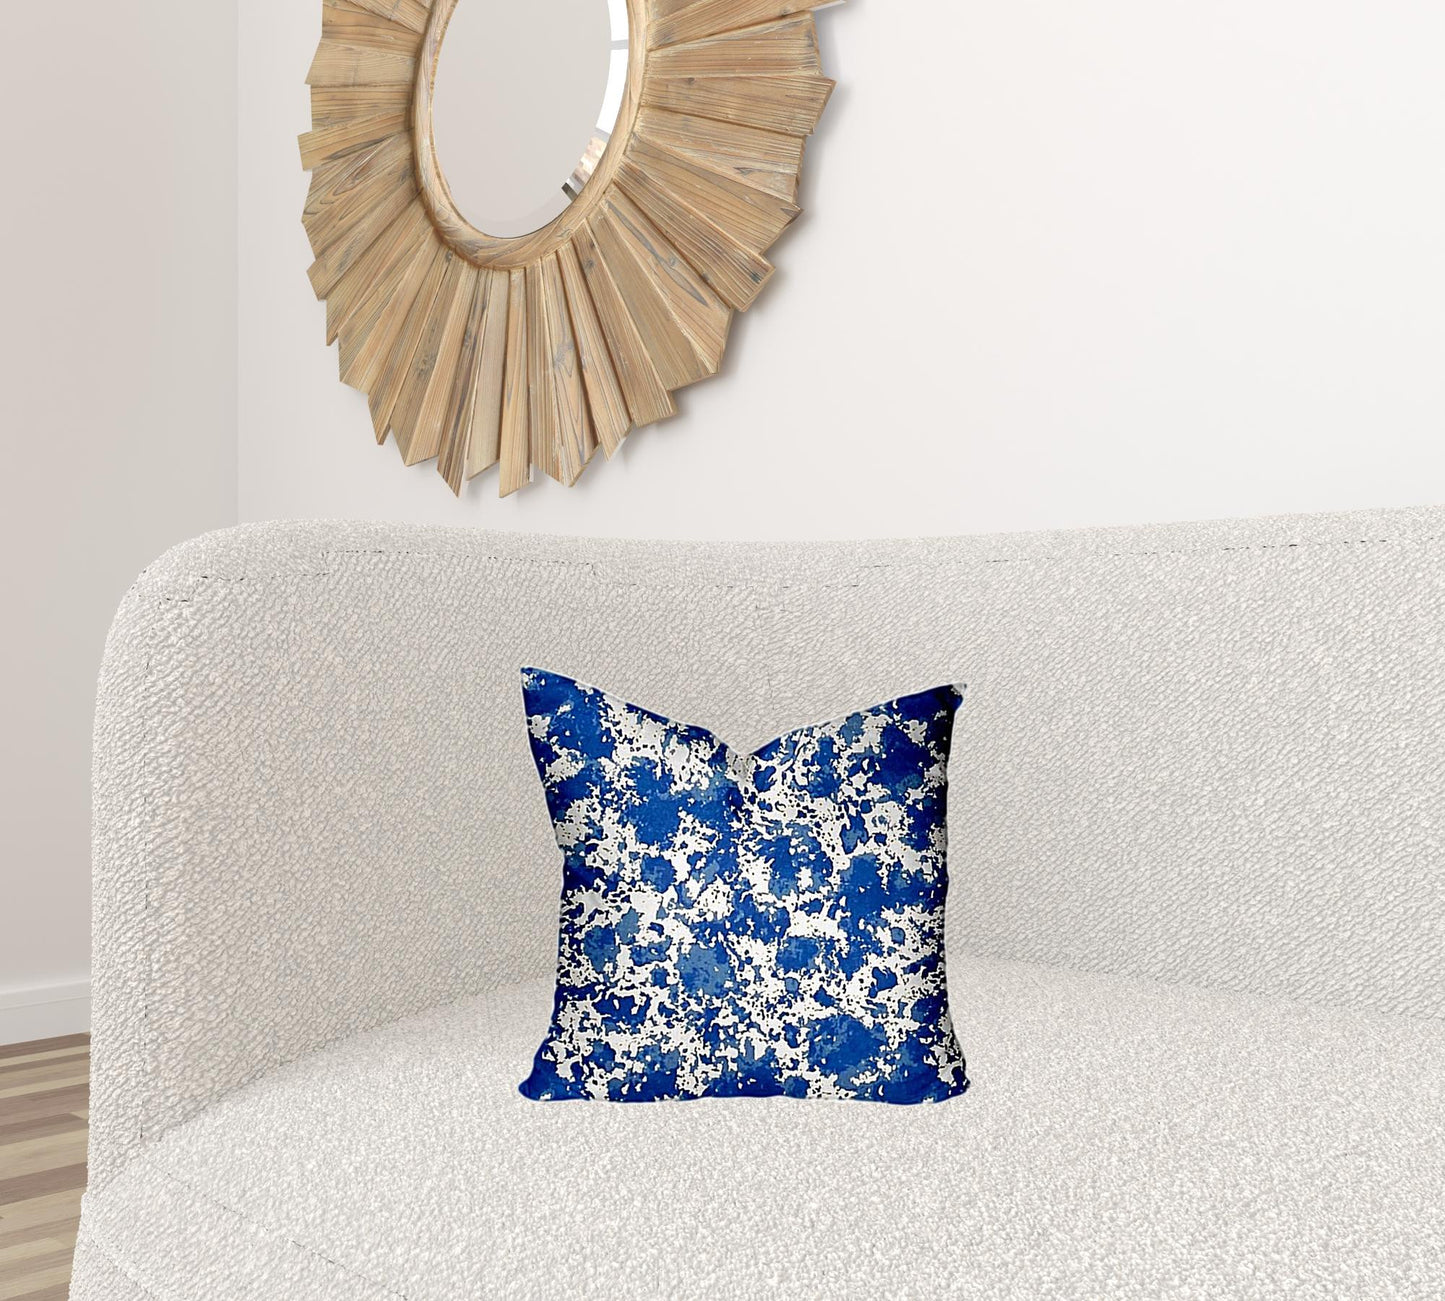 16" X 16" Blue And White Enveloped Coastal Throw Indoor Outdoor Pillow